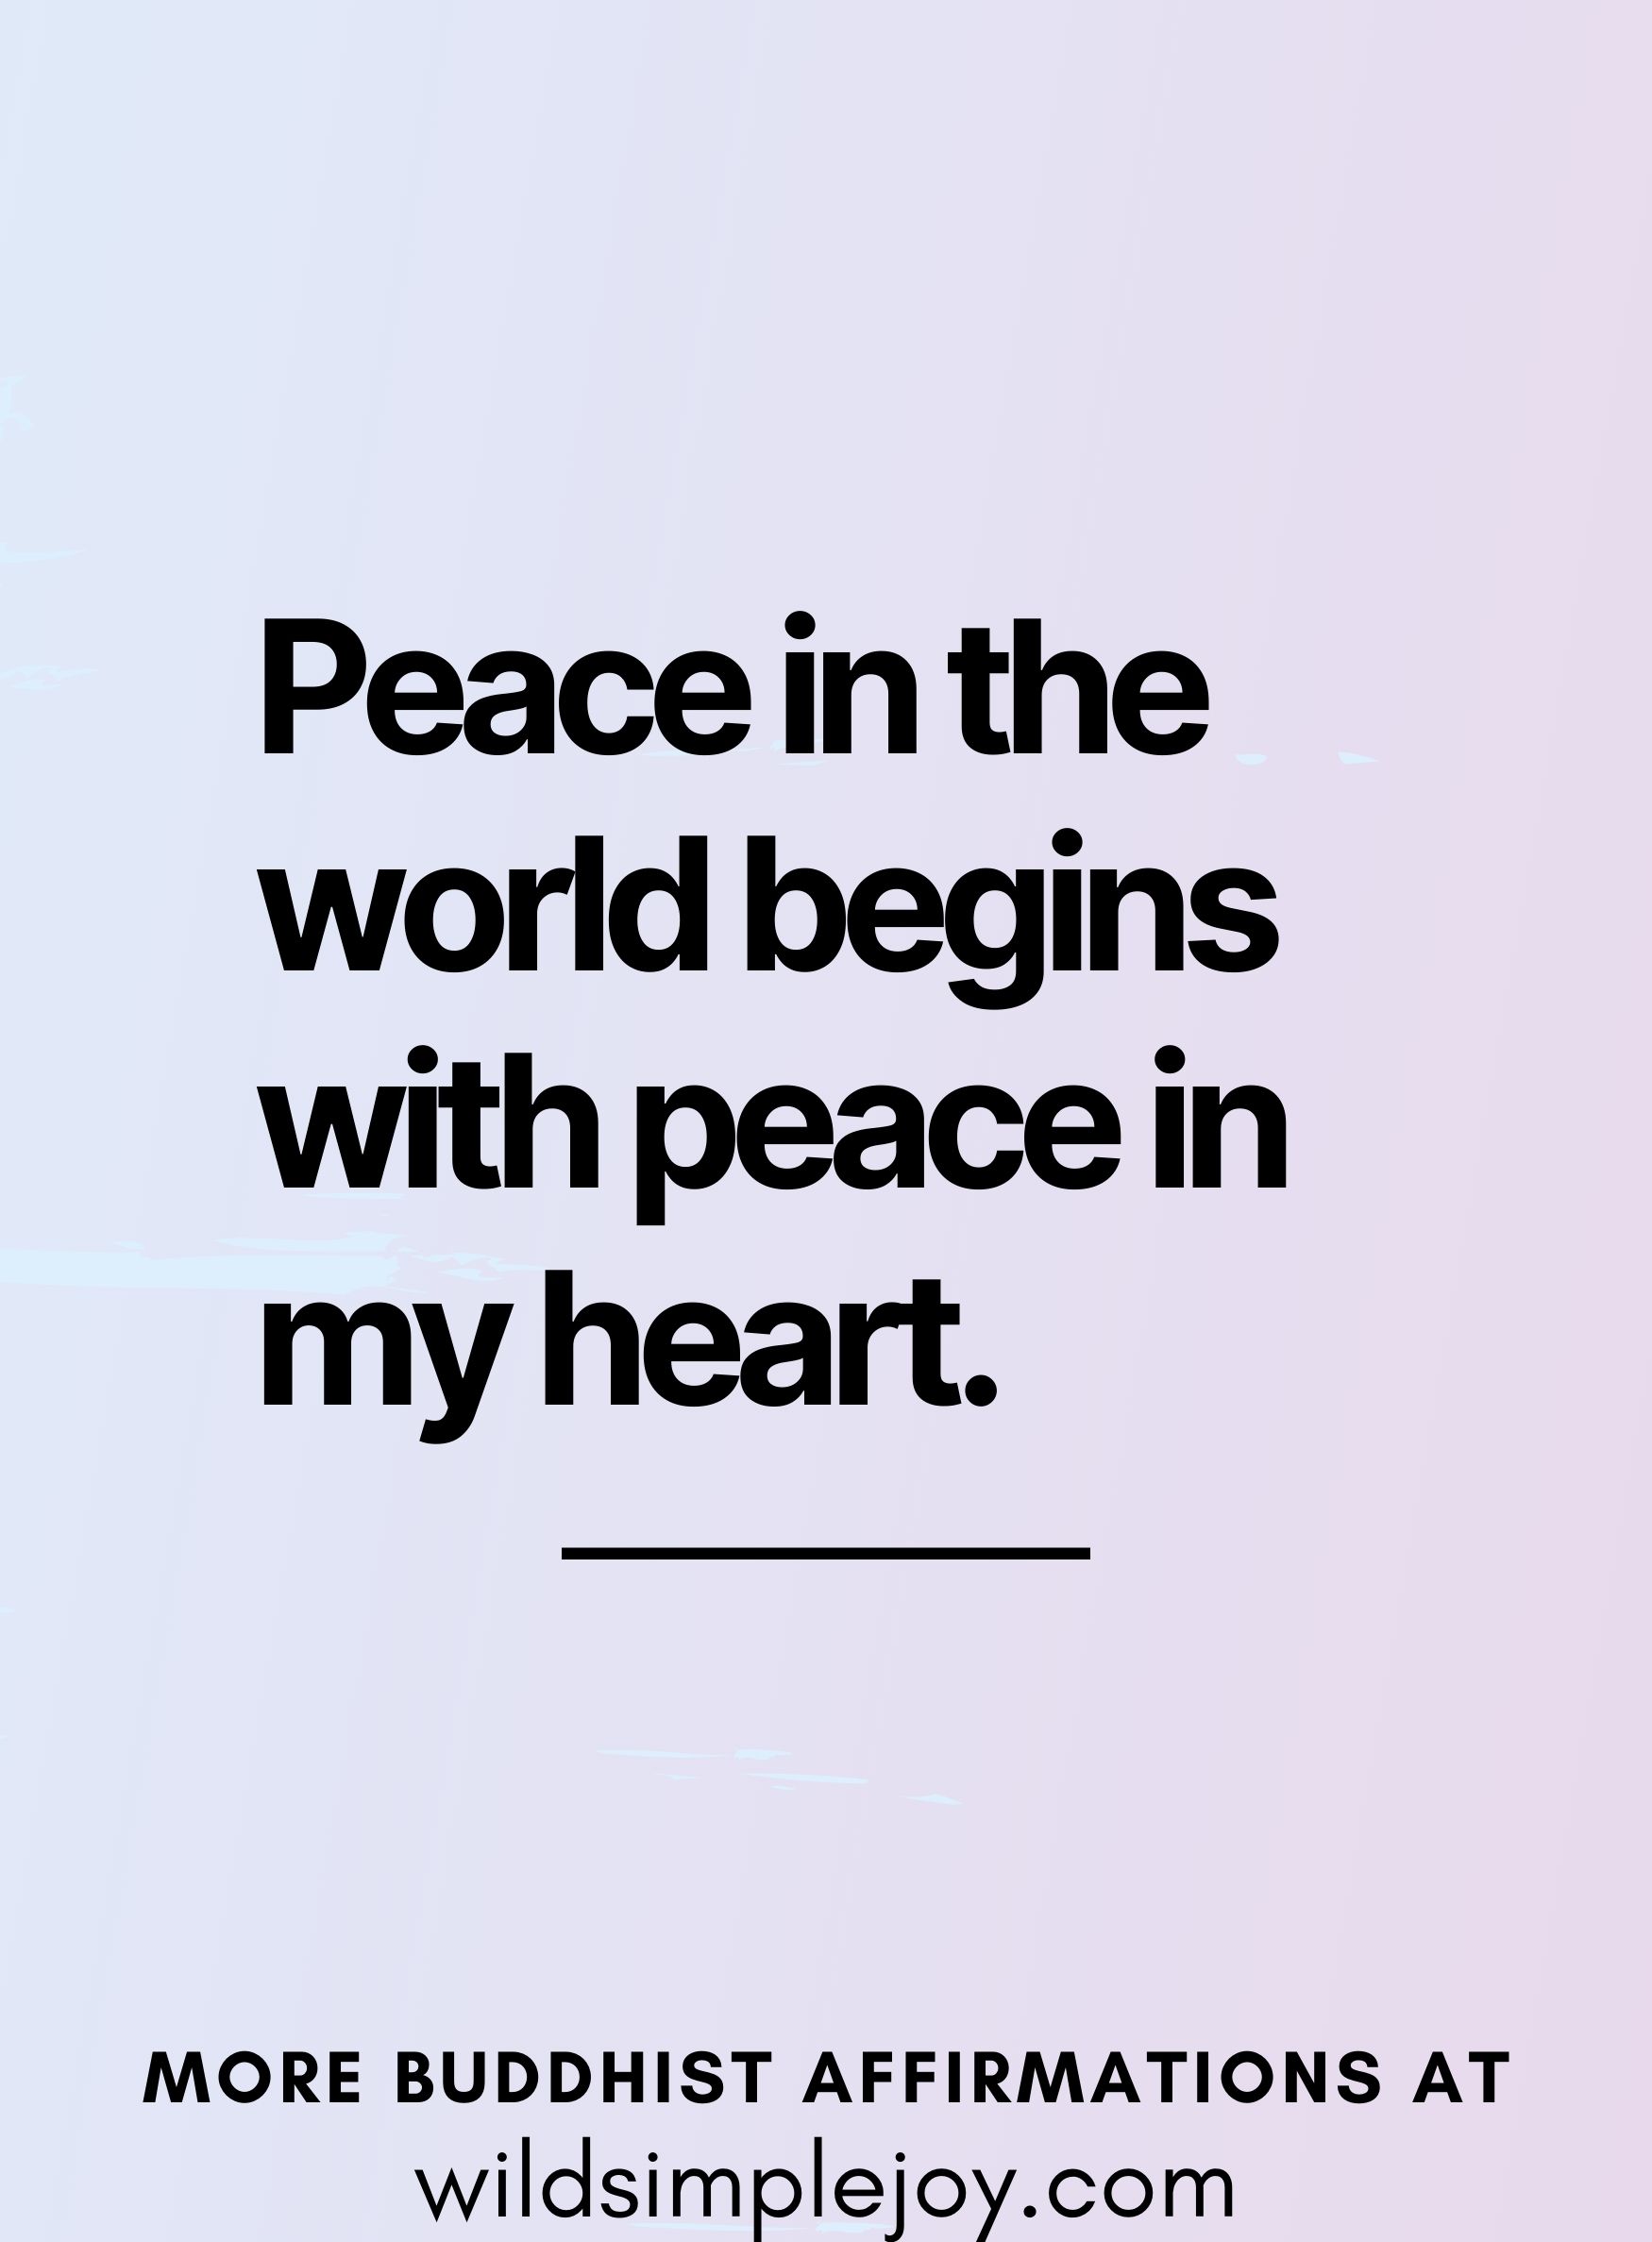 Peace in the world begins with peace in my heart (Affirmation based on Thich Nhat Hanh on a pink and blue background)